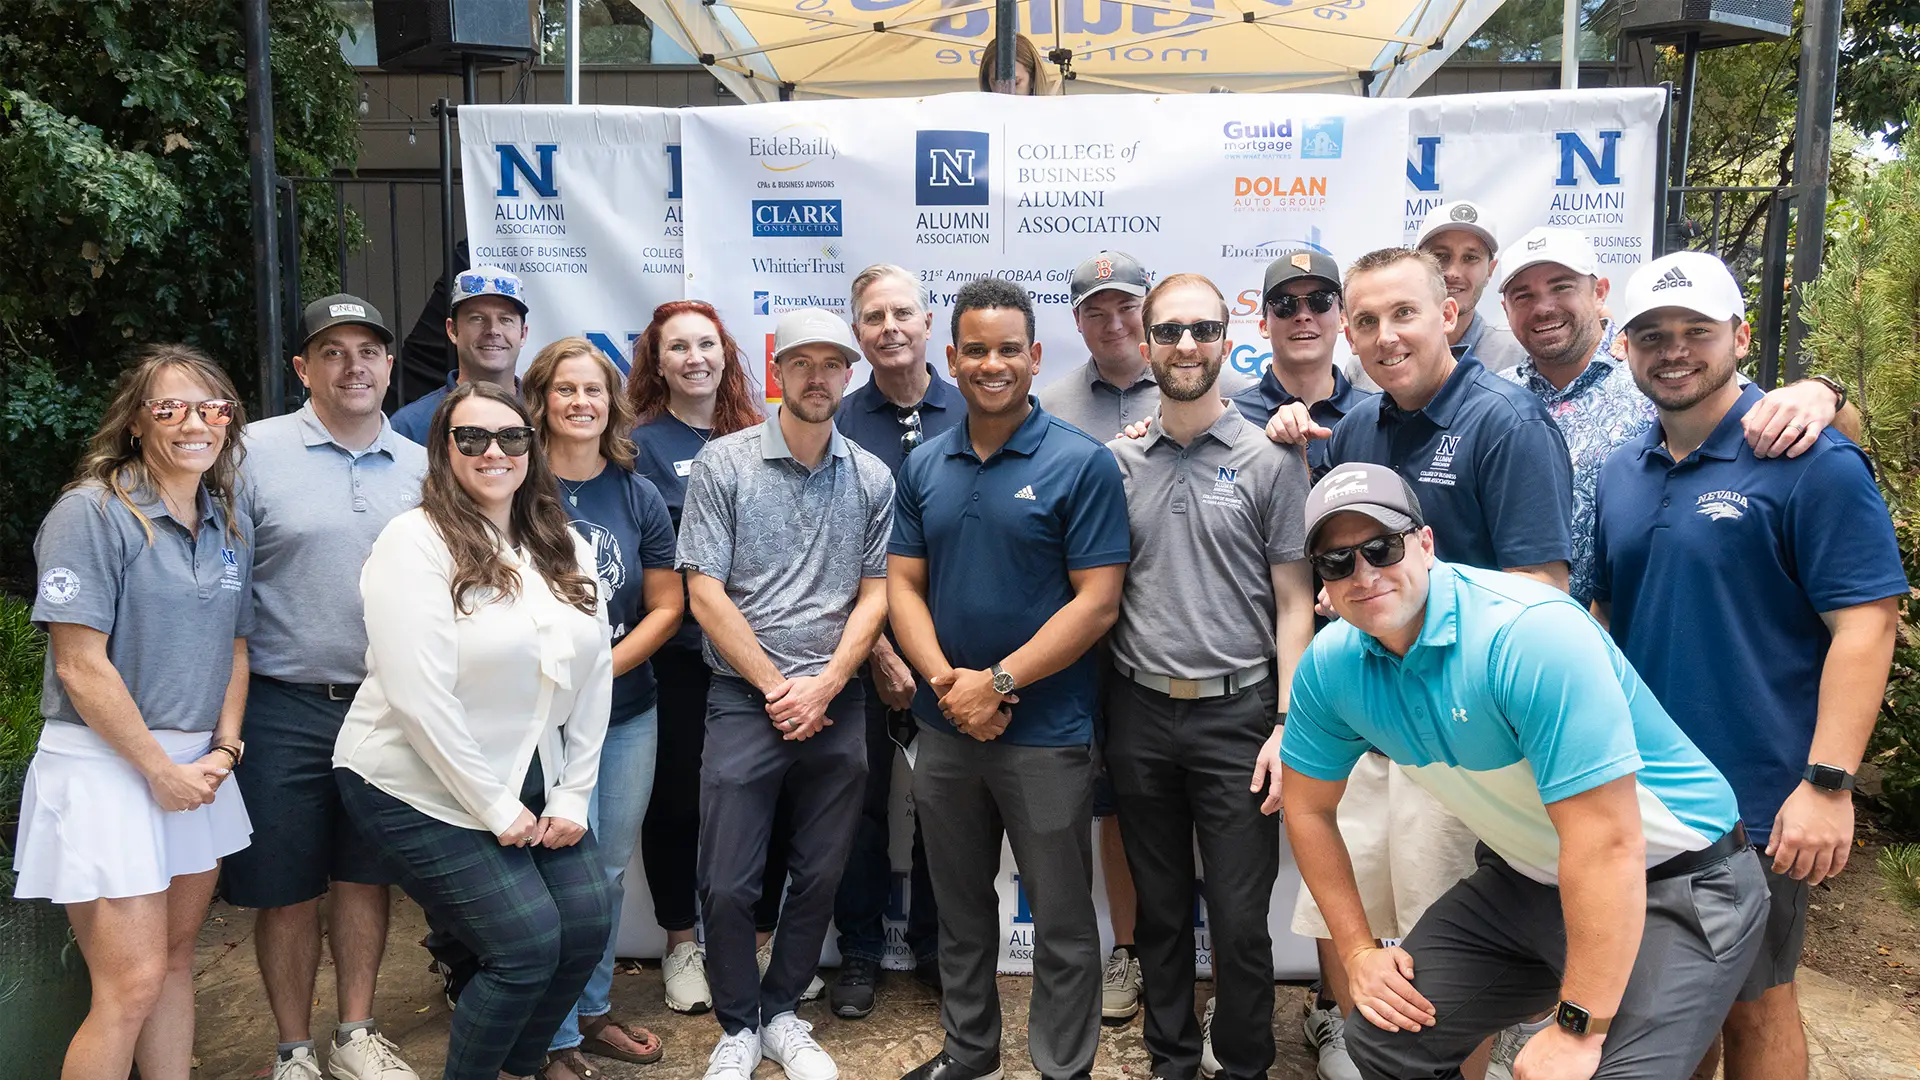 Members of the College of Business Alumni Chapter pose in golf attire at a golf tournament.